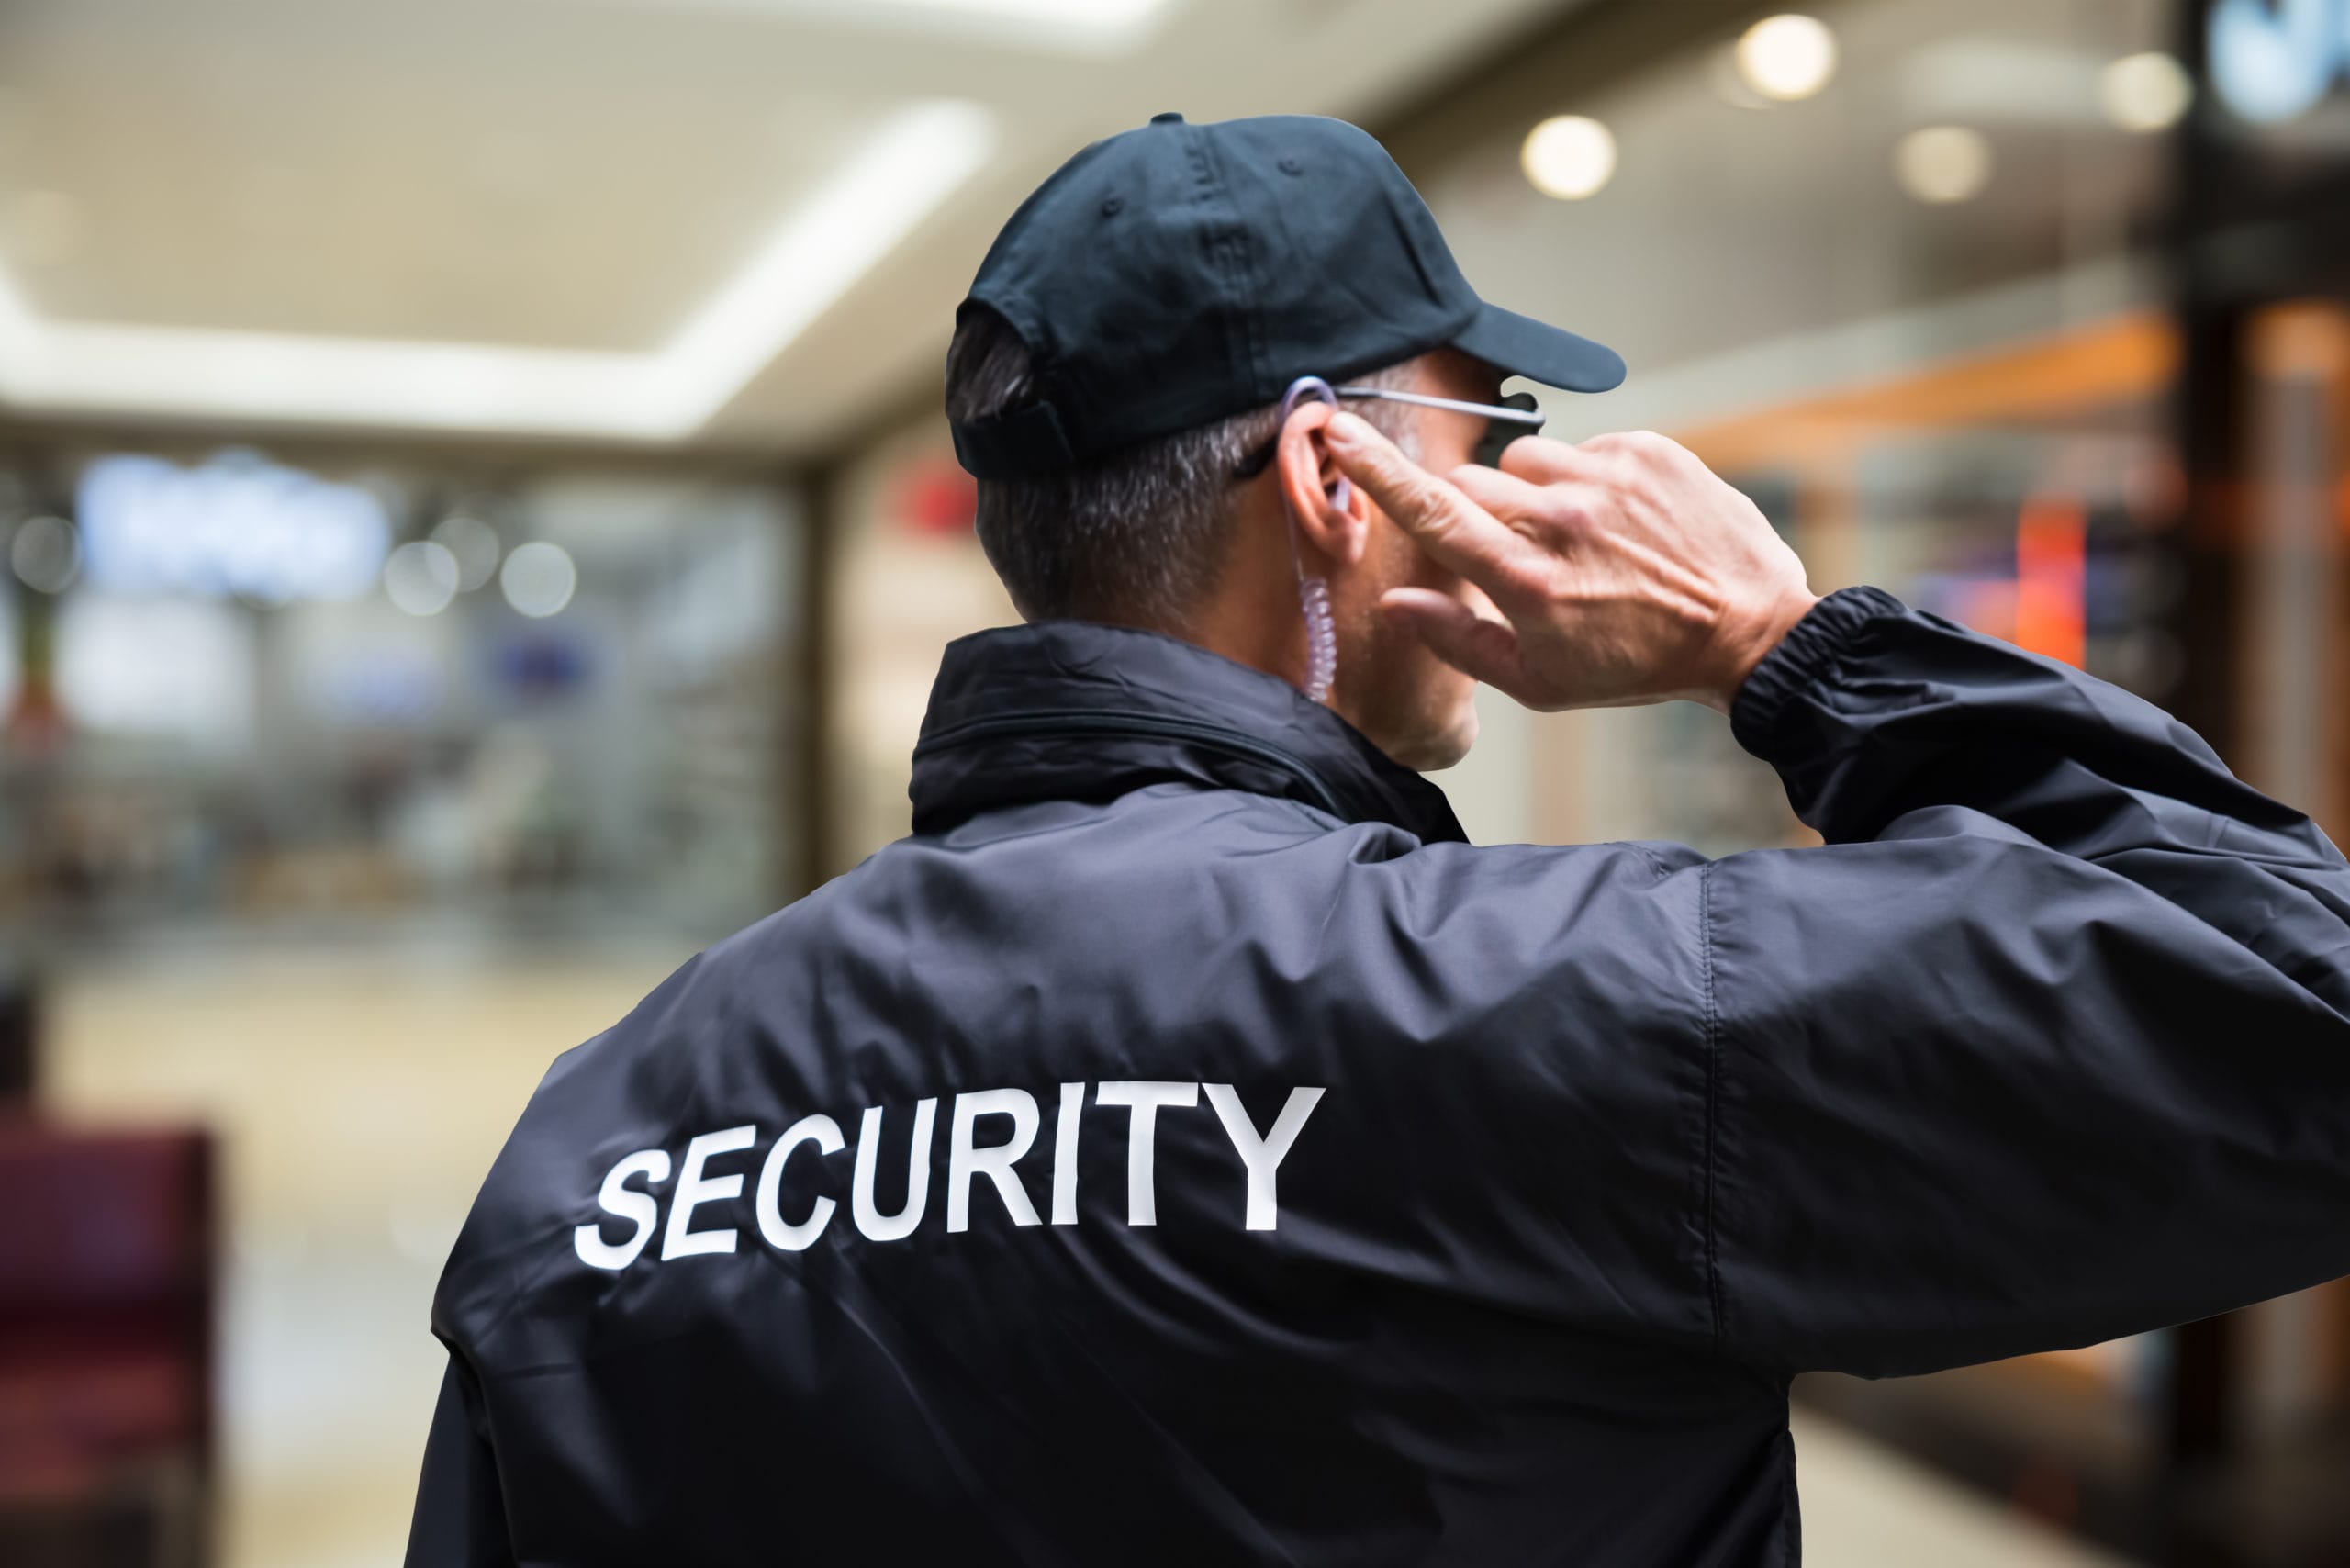 Security officer monitors the premises